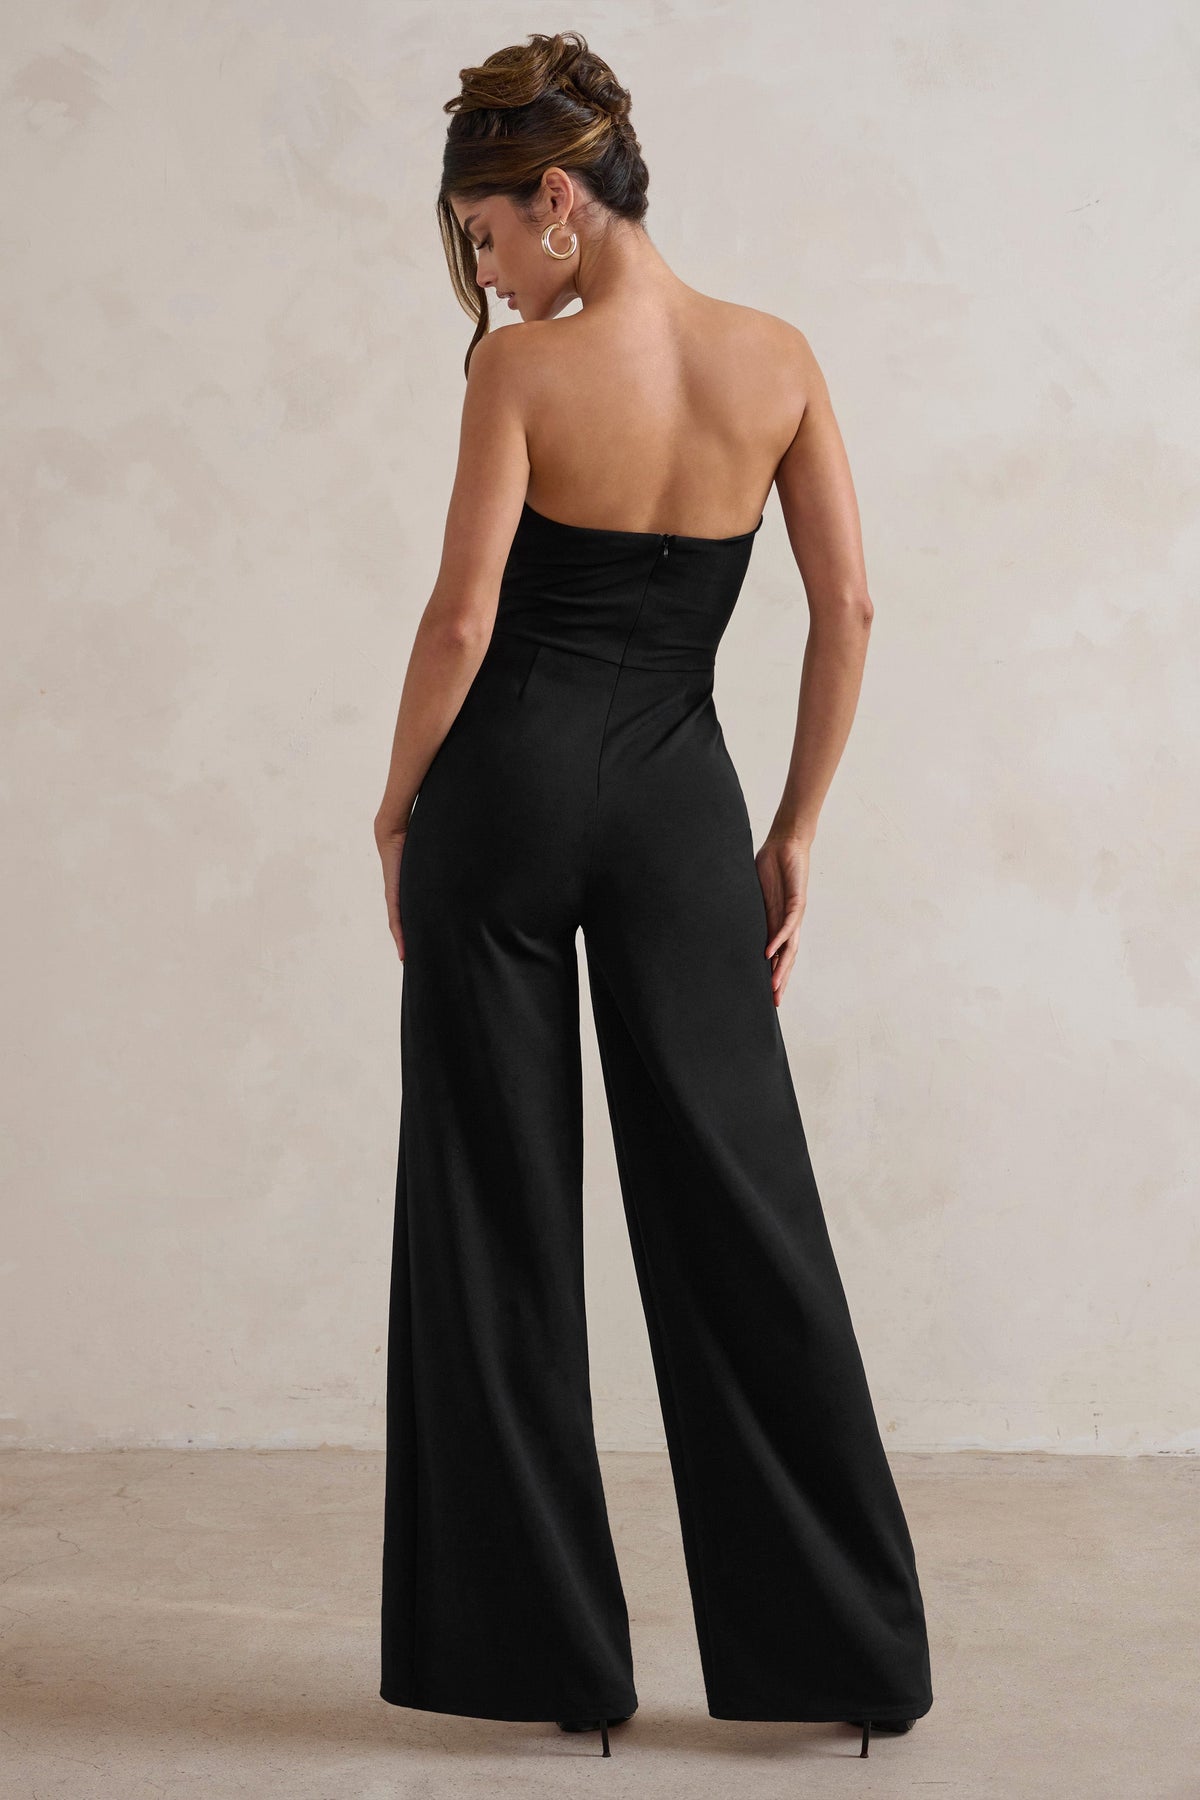 Milana Strapless Wide Leg Jumpsuit - Women's Clothing | The Pink Turtle